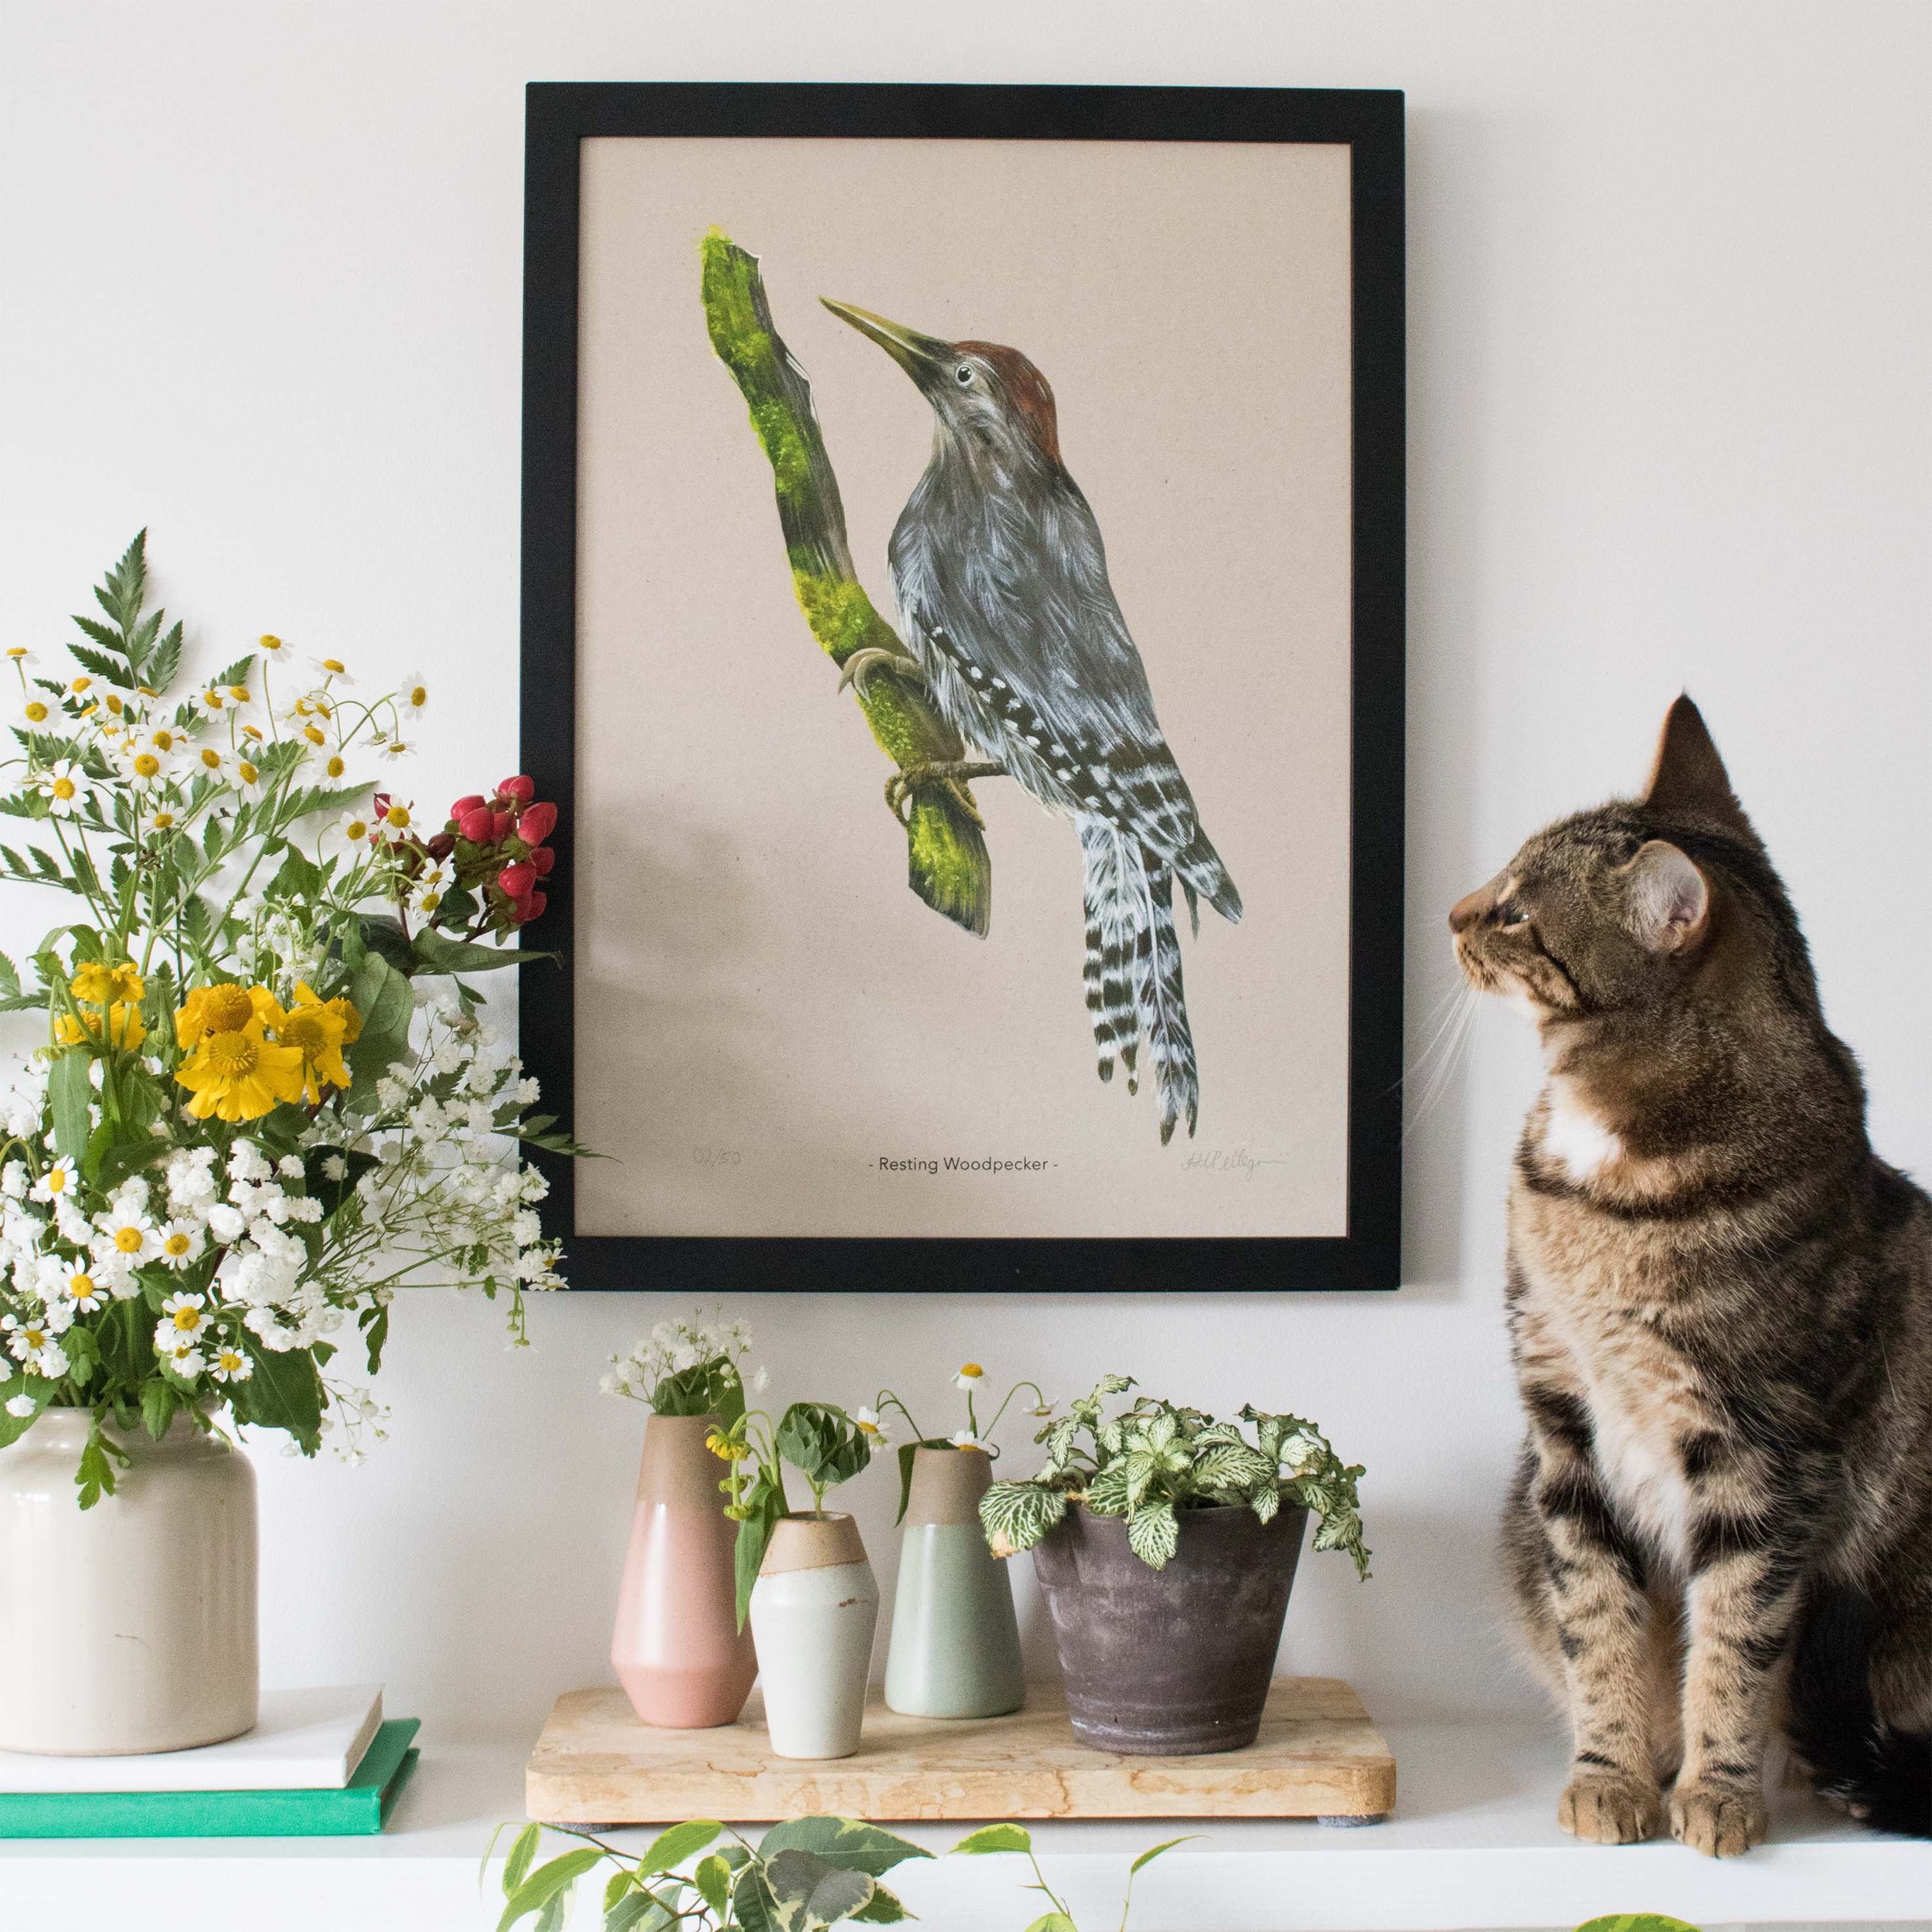 Resting Woodpecker-Botanical print-front view with cat.jpg